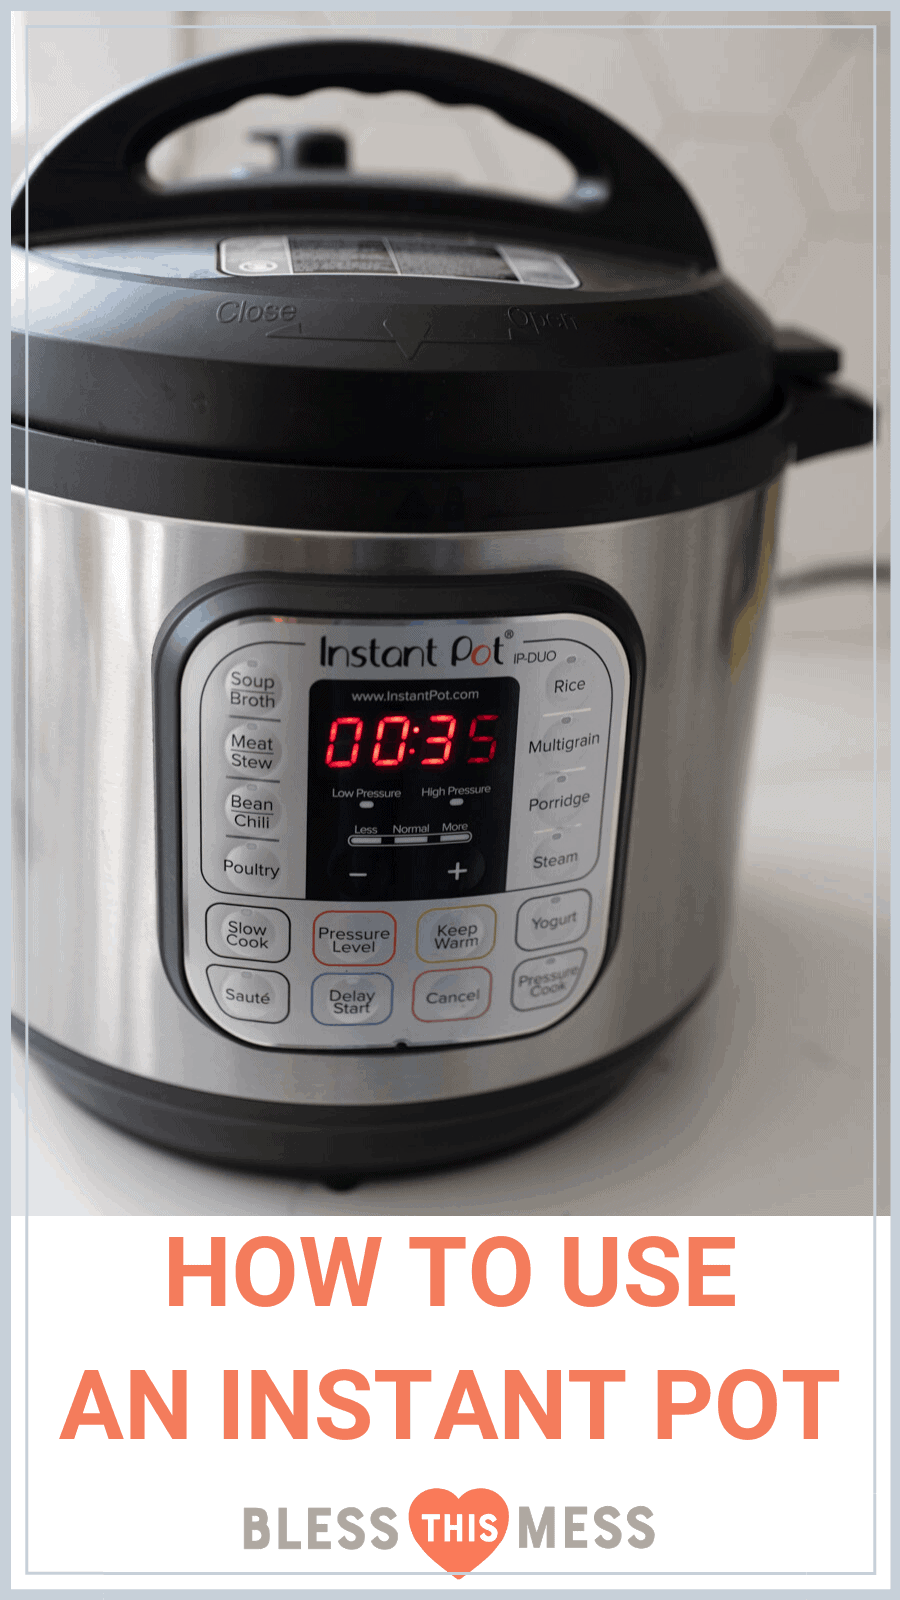 https://www.blessthismessplease.com/wp-content/uploads/2020/03/HOW-TO-USE-AN-INSTANT-POT-BLESS-THIS-MESS-1.png